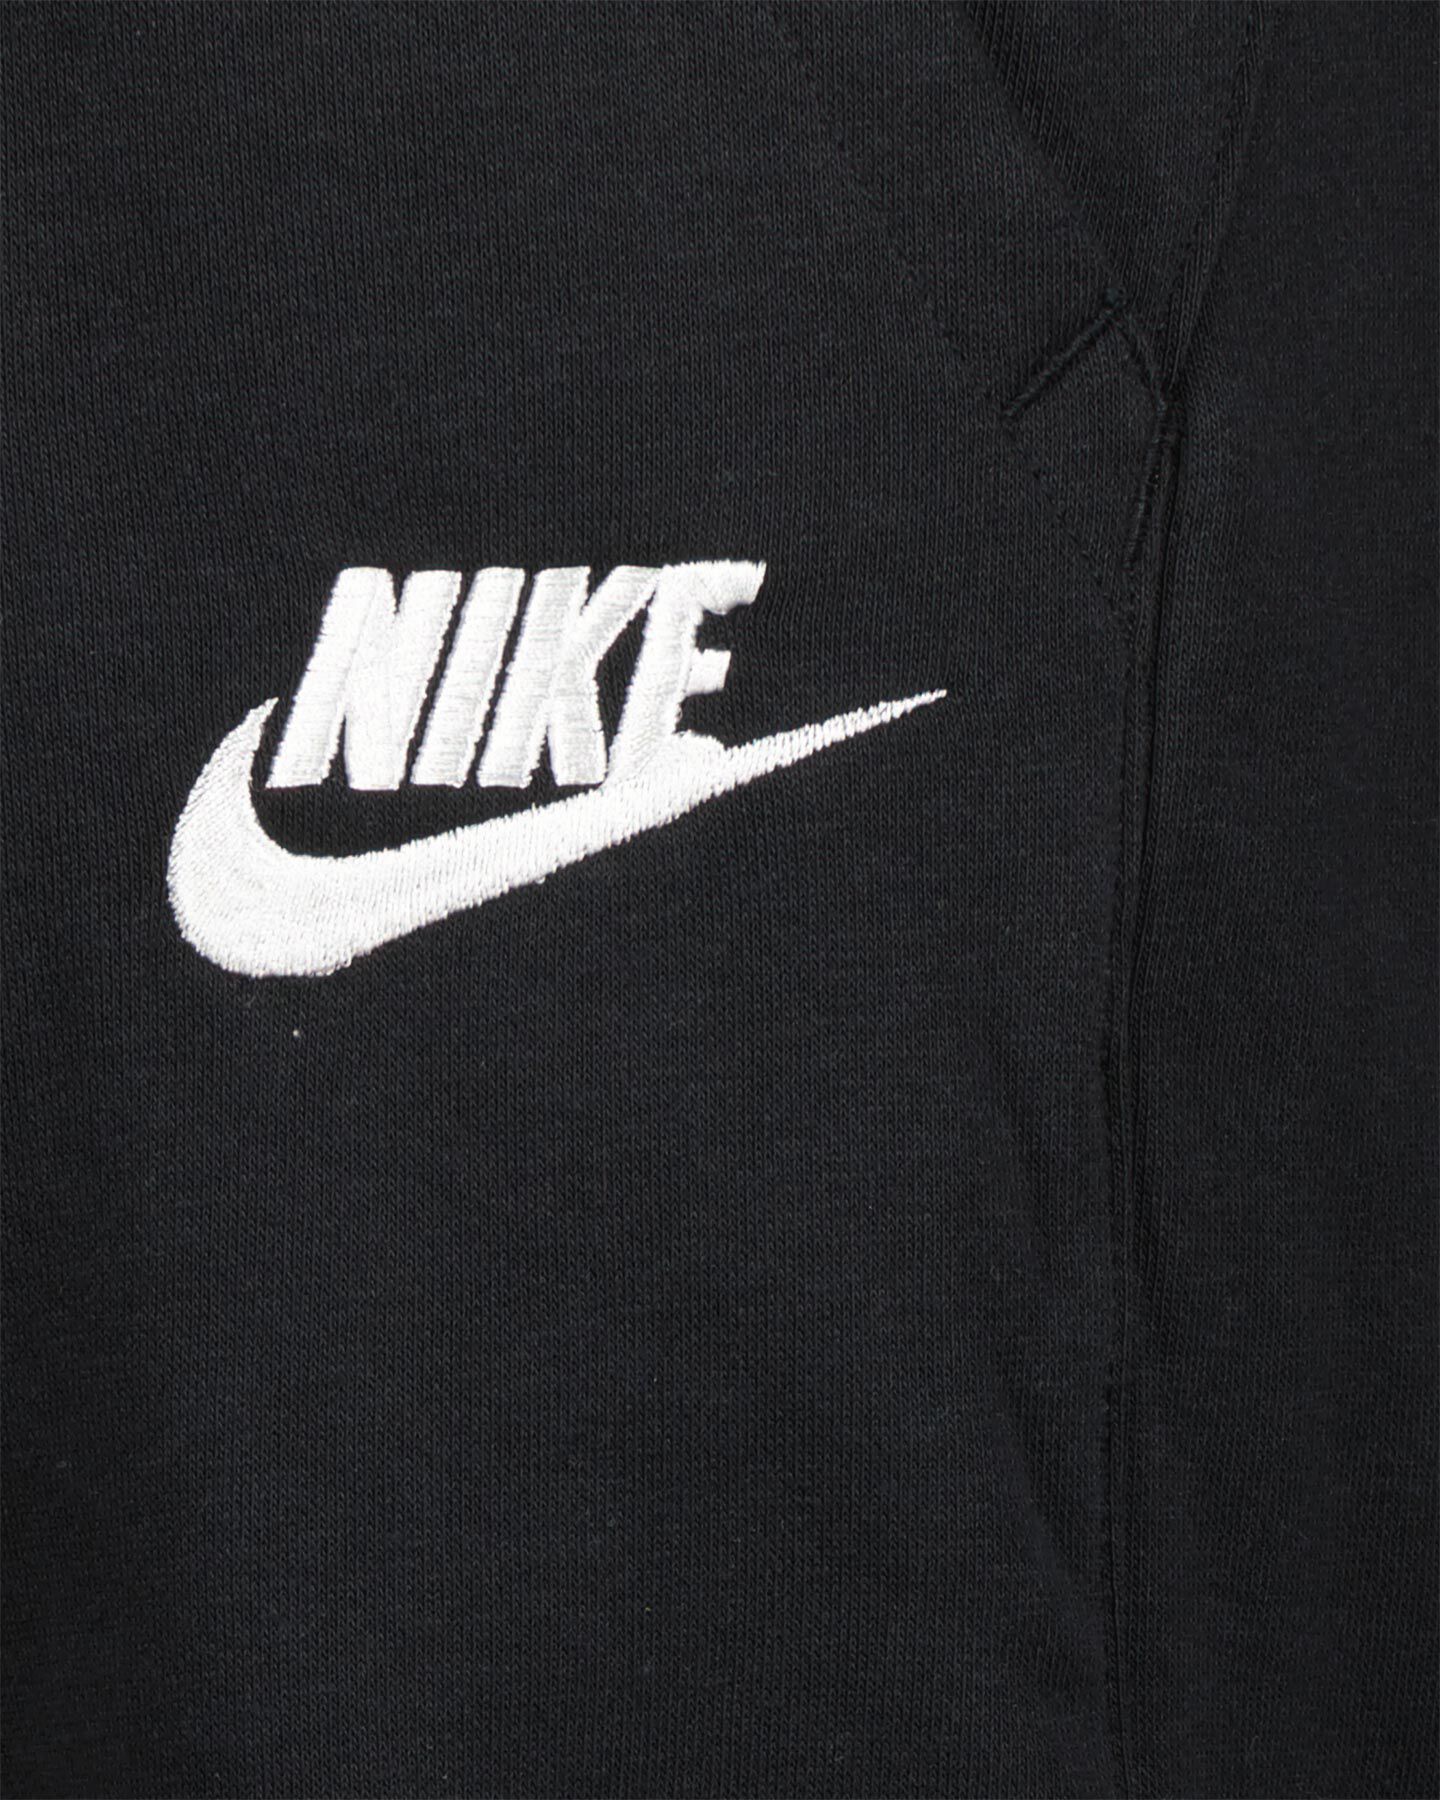  Pantalone NIKE SMALL LOGO EMBROIDERED JR S5074657|010|XS scatto 3